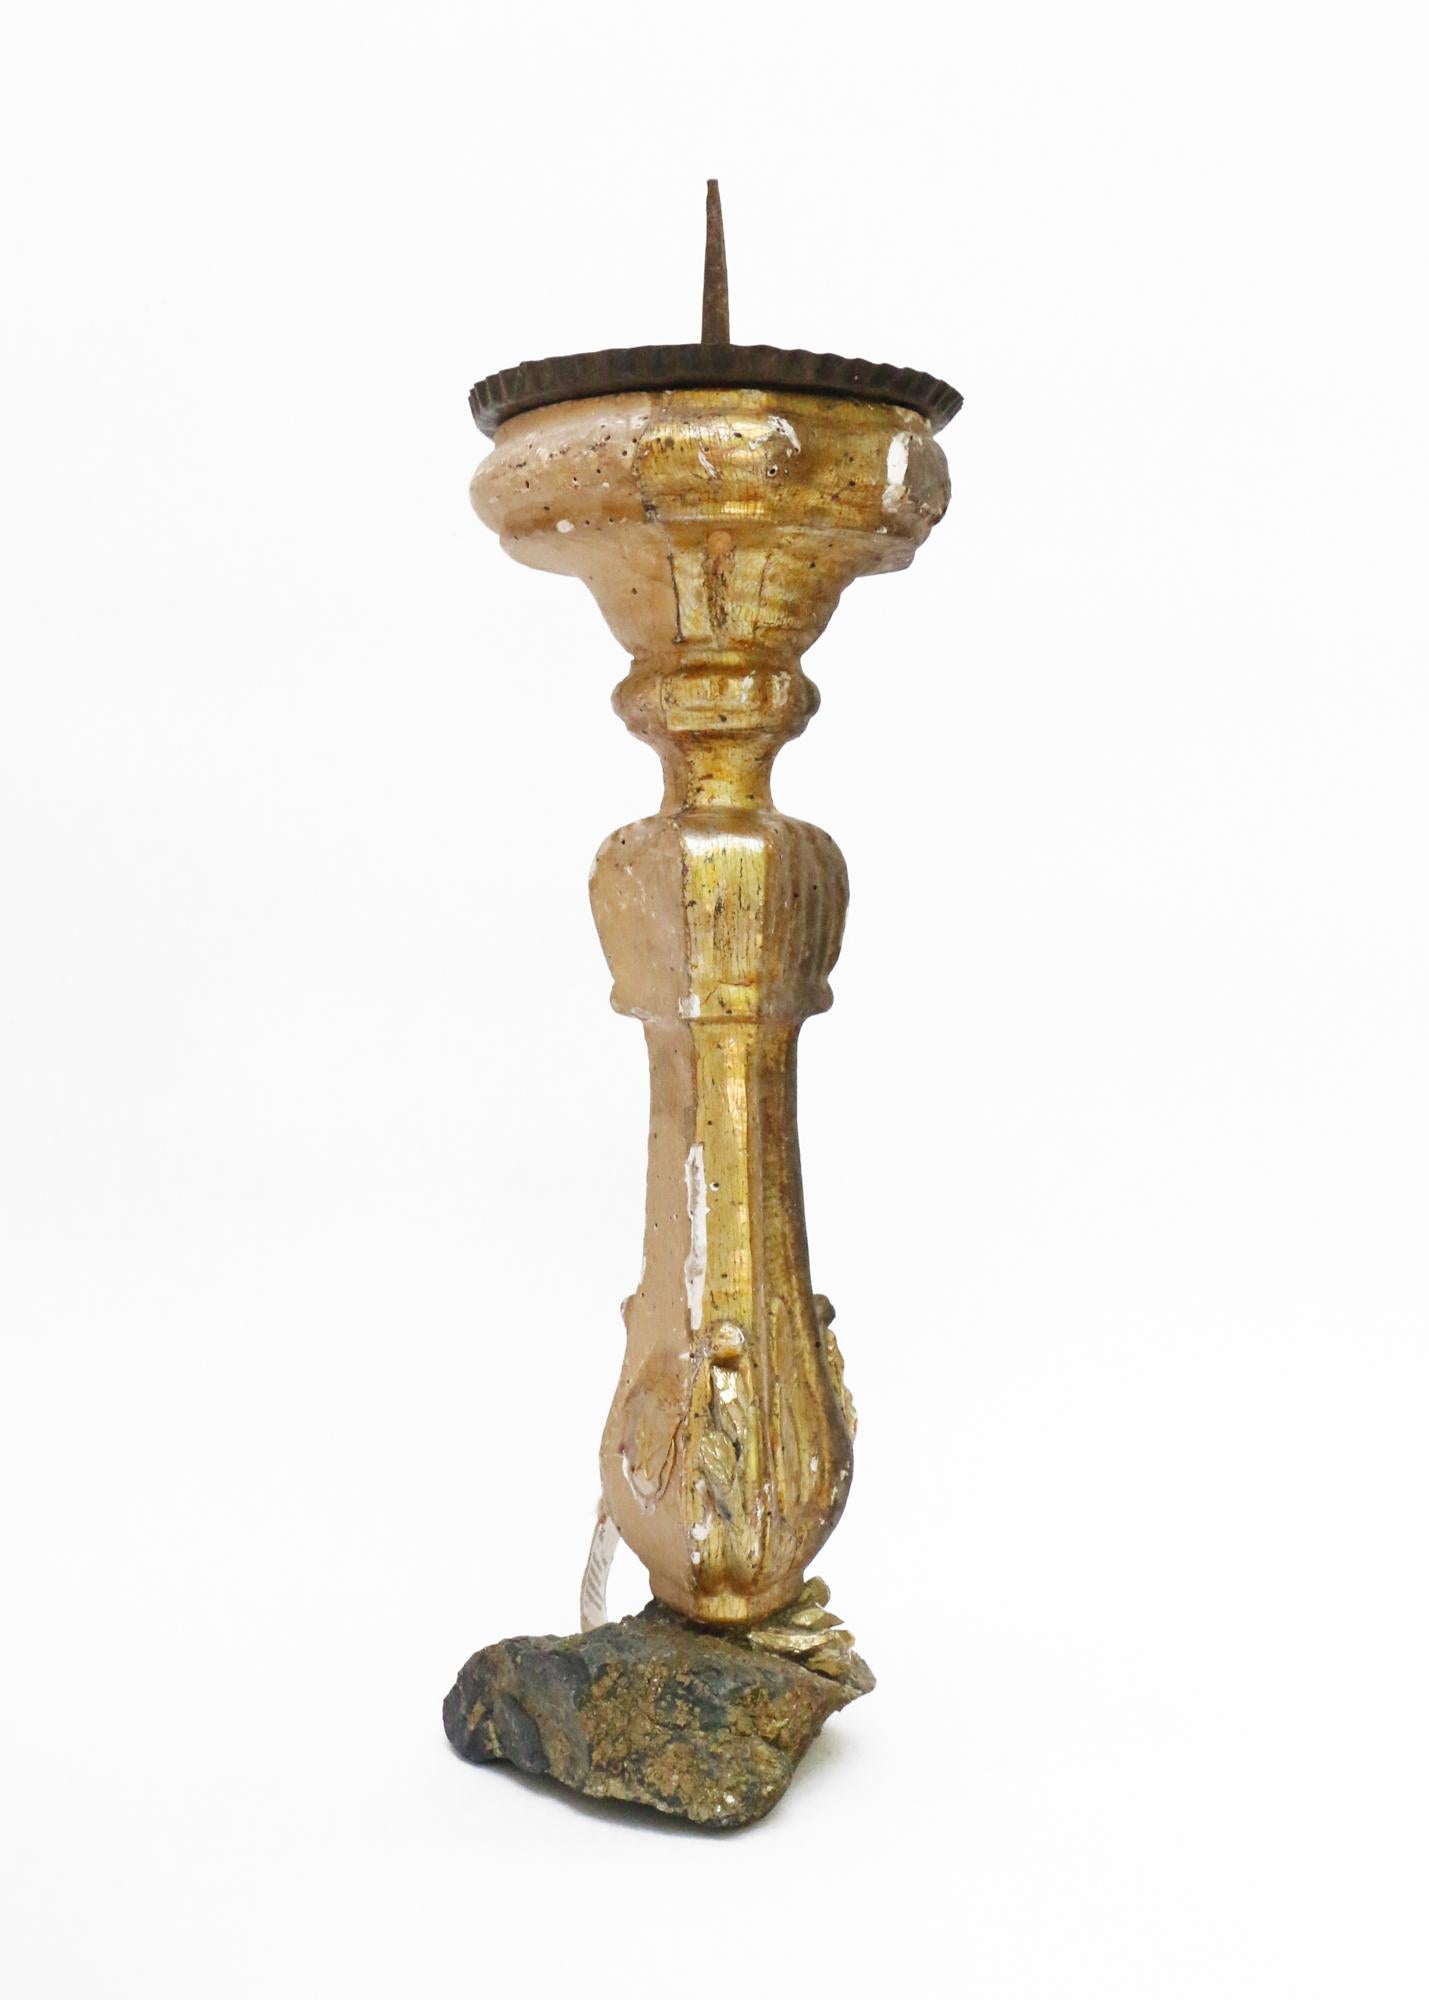 17th Century Italian Gilt Candlestick with Chalcopyrite and Gold-Plated Quartz In Distressed Condition For Sale In Dublin, Dalkey